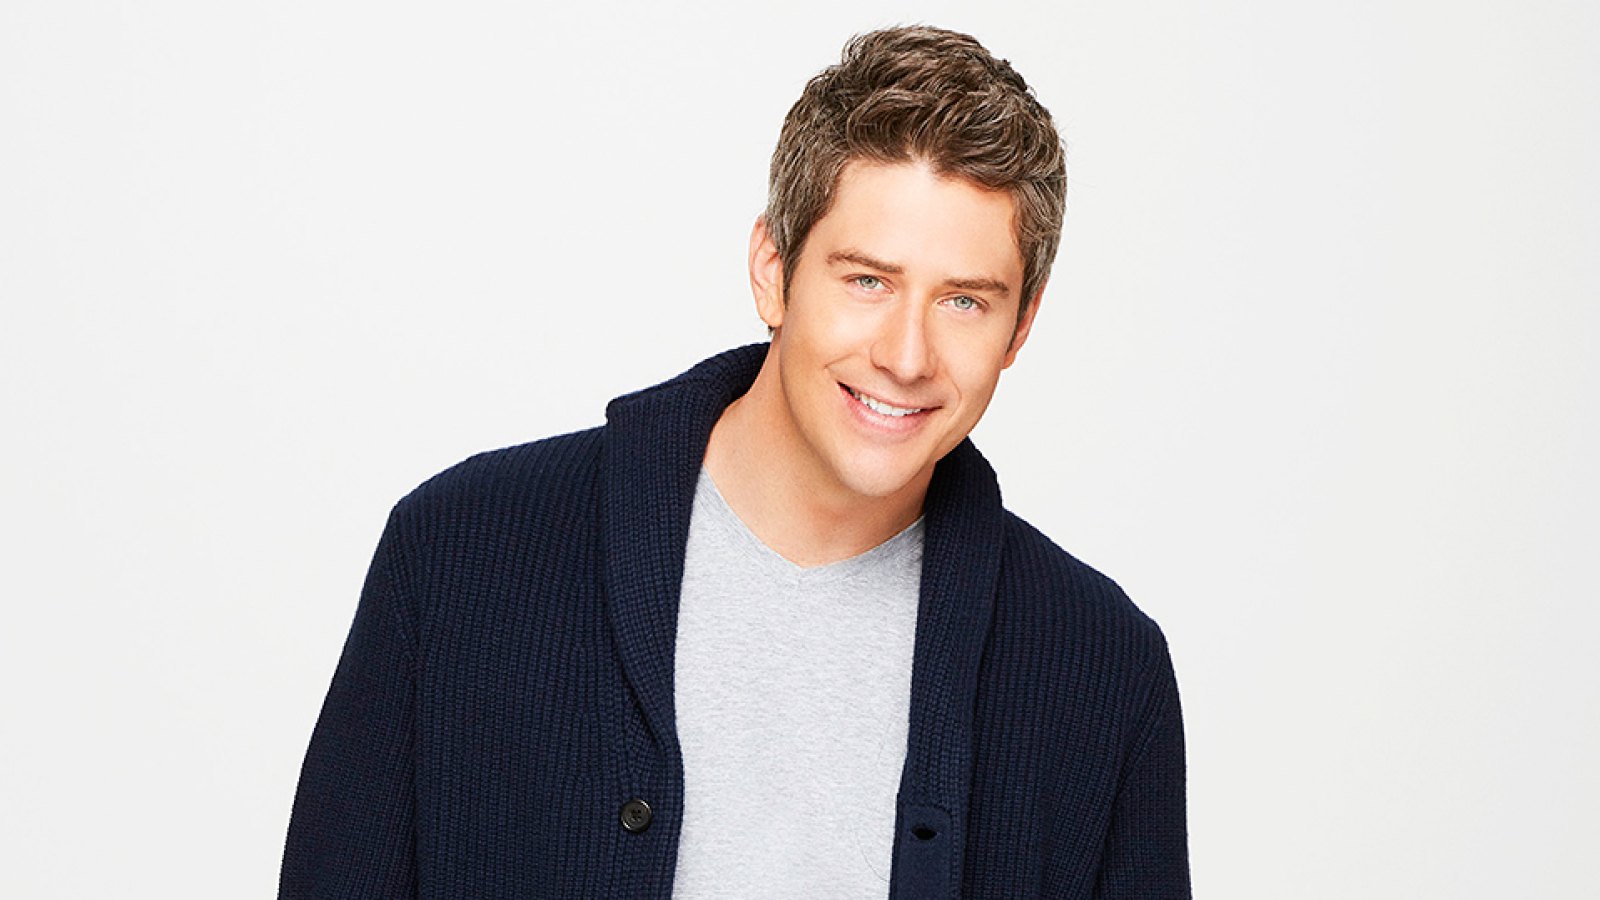 Arie Luyendyk, Jr. 25 Things You Don't Know About Me